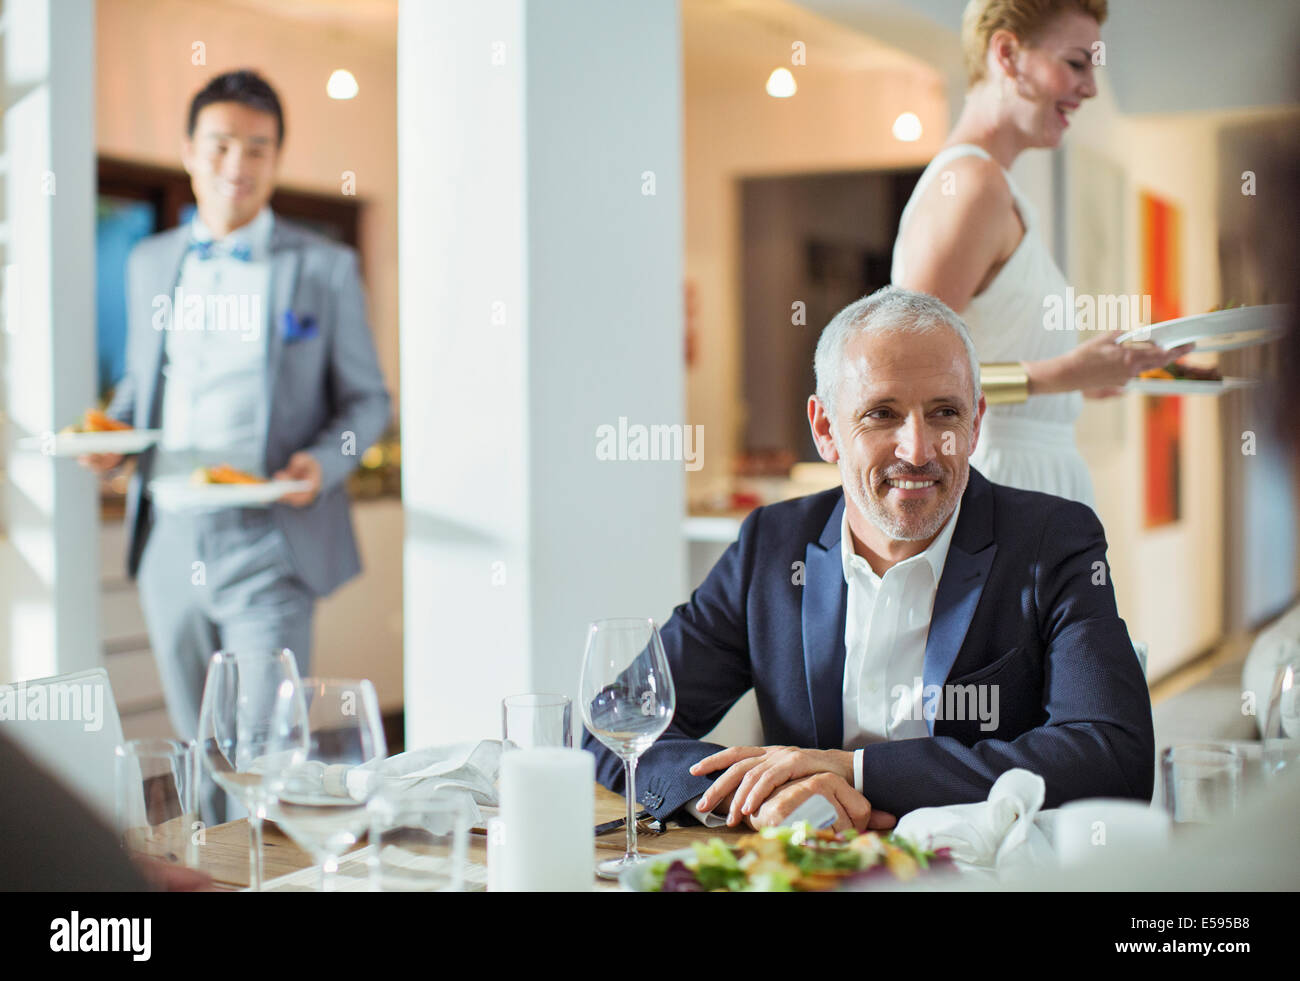 Man sitting at table at dinner party Stock Photo